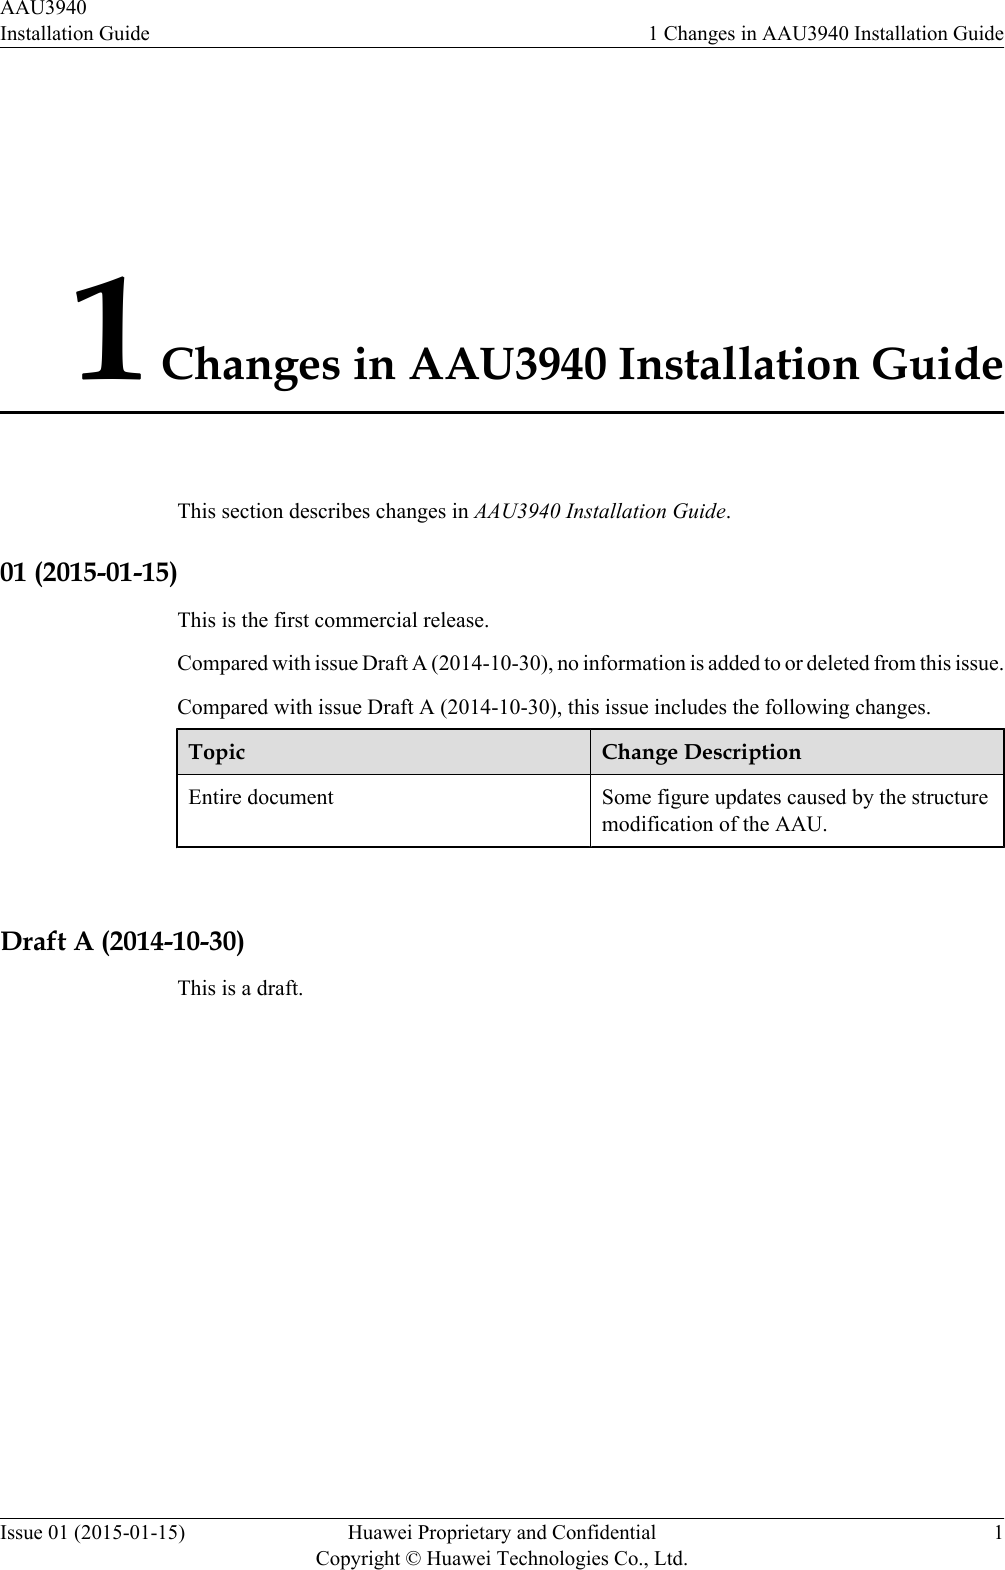 1 Changes in AAU3940 Installation GuideThis section describes changes in AAU3940 Installation Guide.01 (2015-01-15)This is the first commercial release.Compared with issue Draft A (2014-10-30), no information is added to or deleted from this issue.Compared with issue Draft A (2014-10-30), this issue includes the following changes.Topic Change DescriptionEntire document Some figure updates caused by the structuremodification of the AAU. Draft A (2014-10-30)This is a draft.AAU3940Installation Guide 1 Changes in AAU3940 Installation GuideIssue 01 (2015-01-15) Huawei Proprietary and ConfidentialCopyright © Huawei Technologies Co., Ltd.1